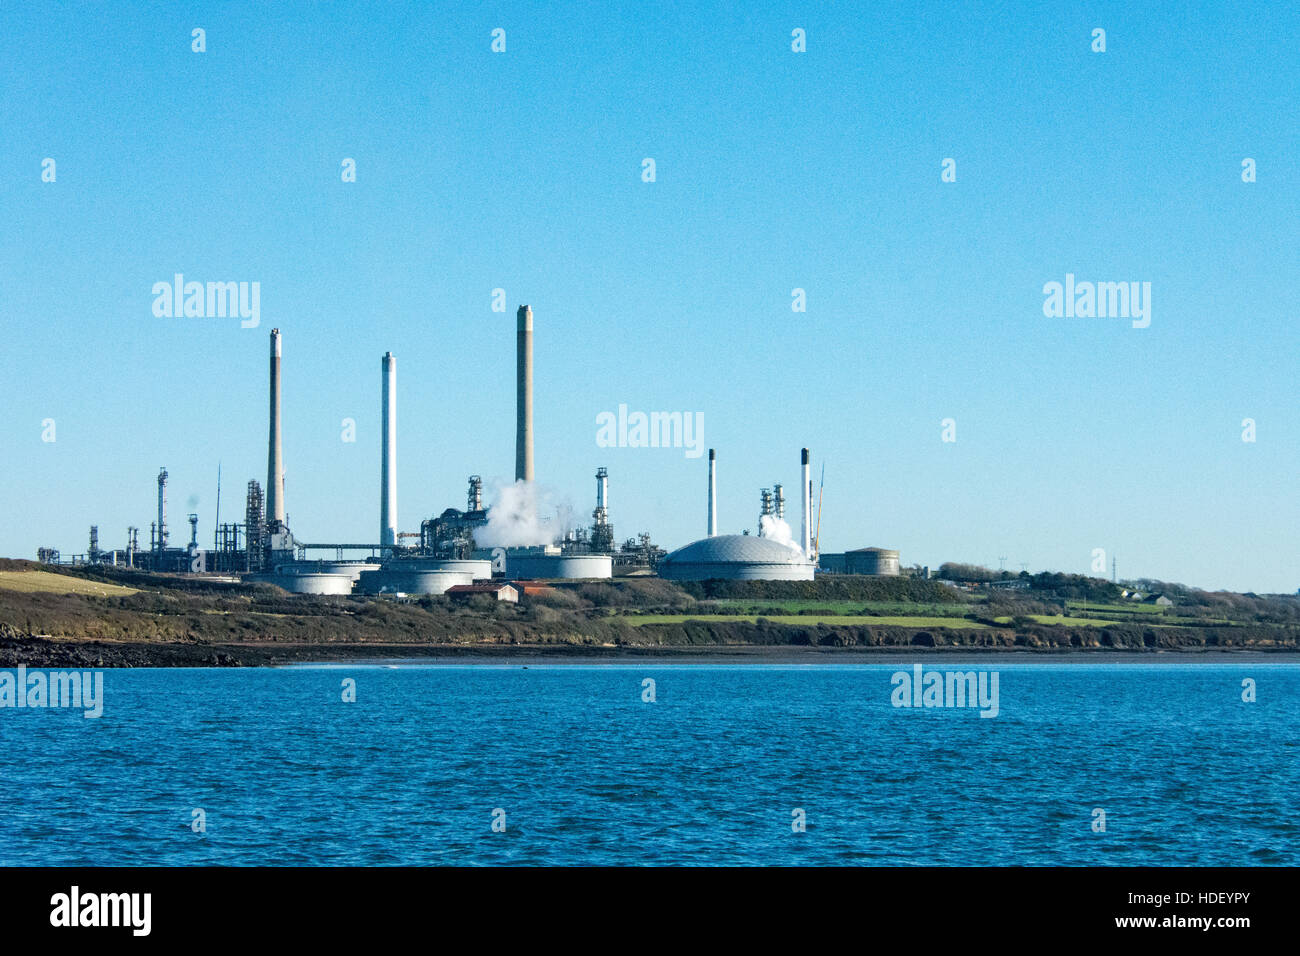 Pembroke refinery with a beautiful blue sky and calm blue sea in the foreground on a bright winters day. Stock Photo